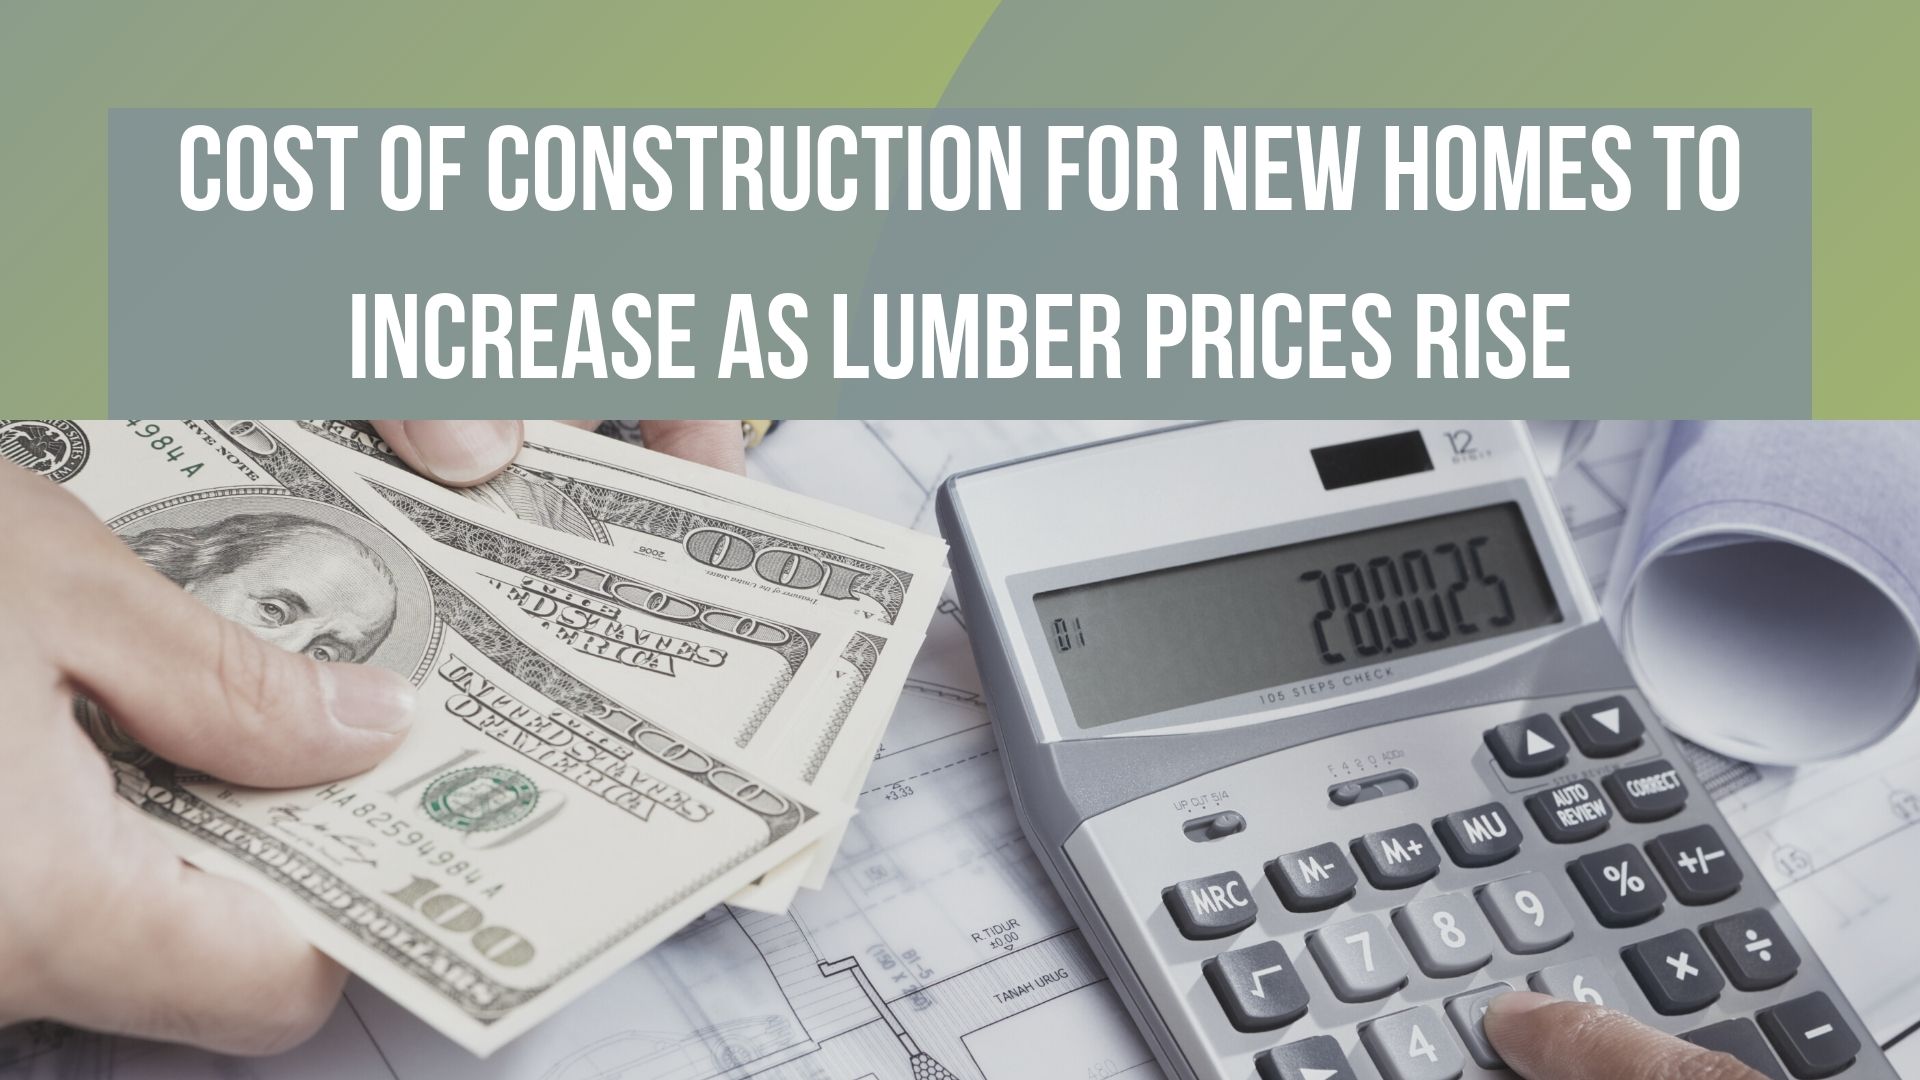 Cost Of Construction For New Homes To Increase As Lumber Prices Rise